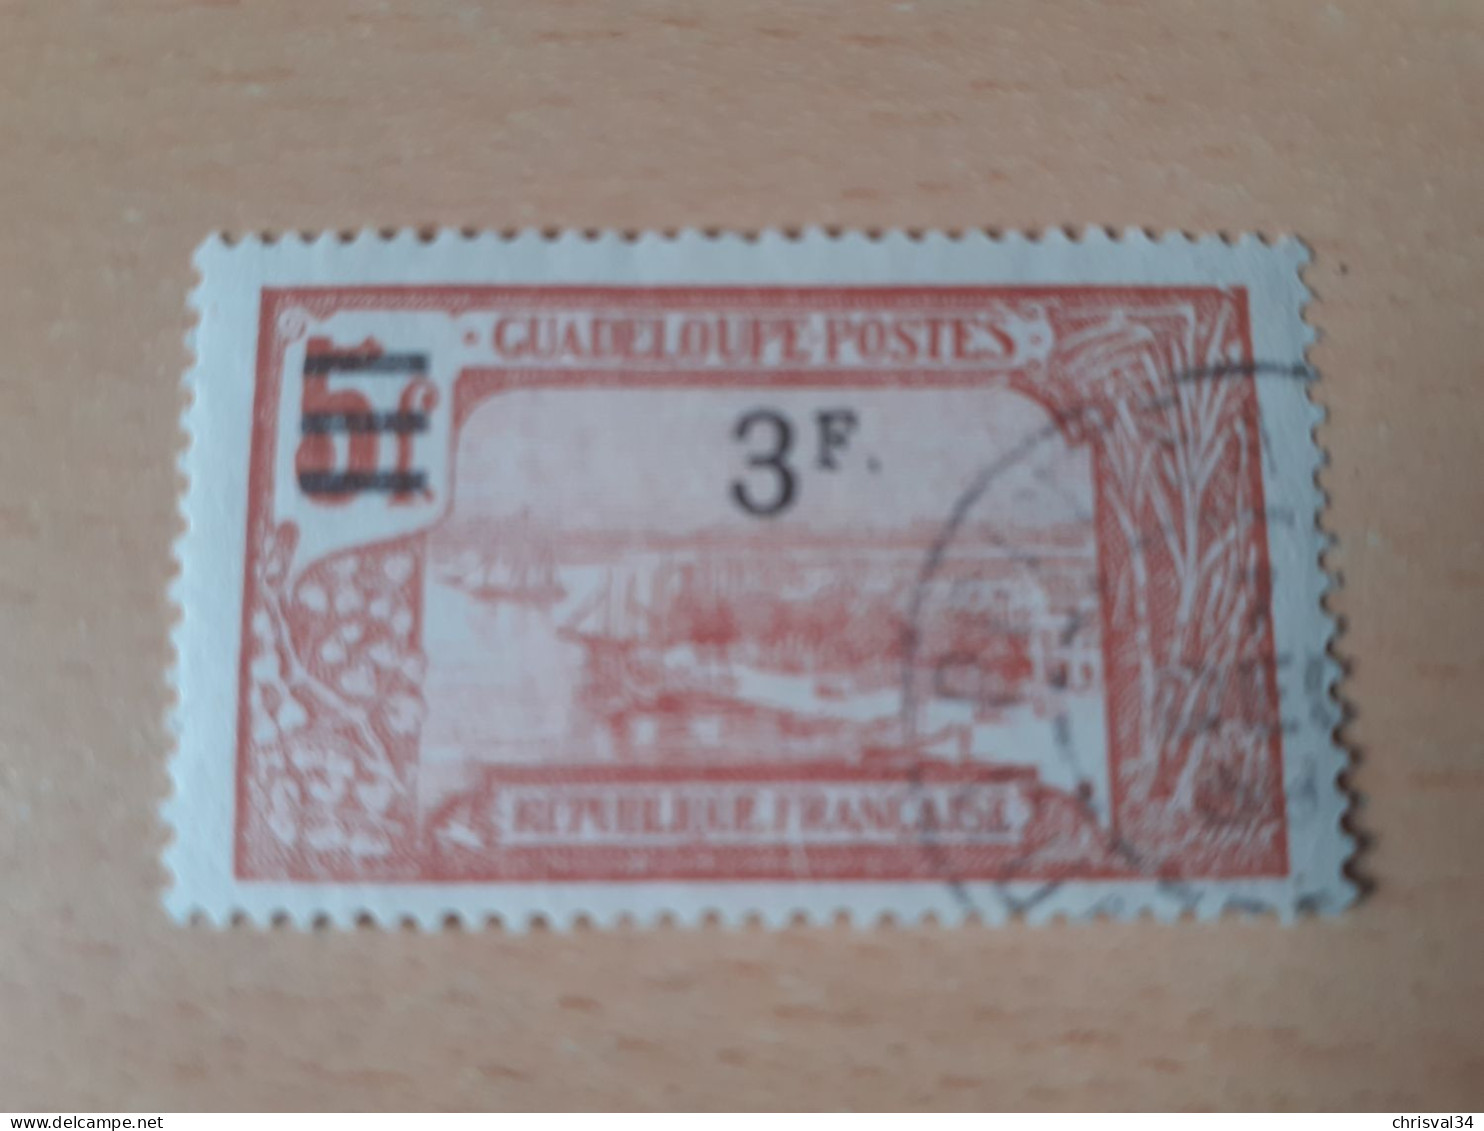 TIMBRE   GUADELOUPE       N  96     COTE  2,00   EUROS  OBLITERE - Used Stamps